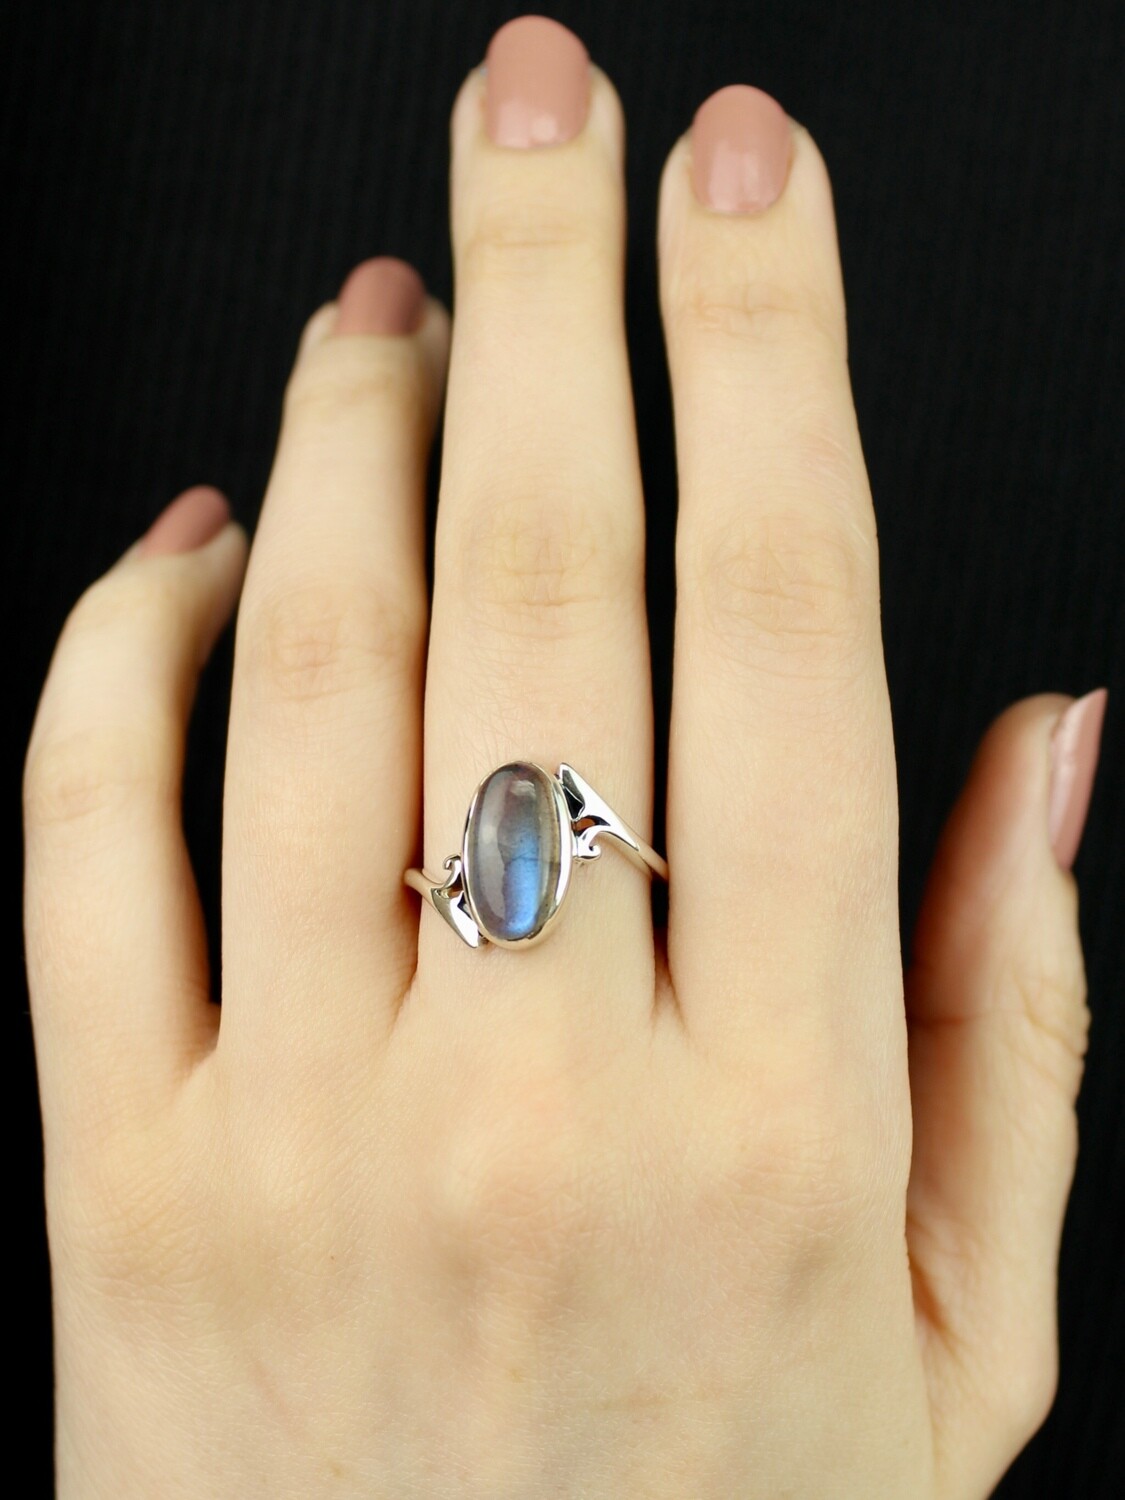 SIZE 9 - Sterling Silver Oval Labradorite Ring - RIG9111